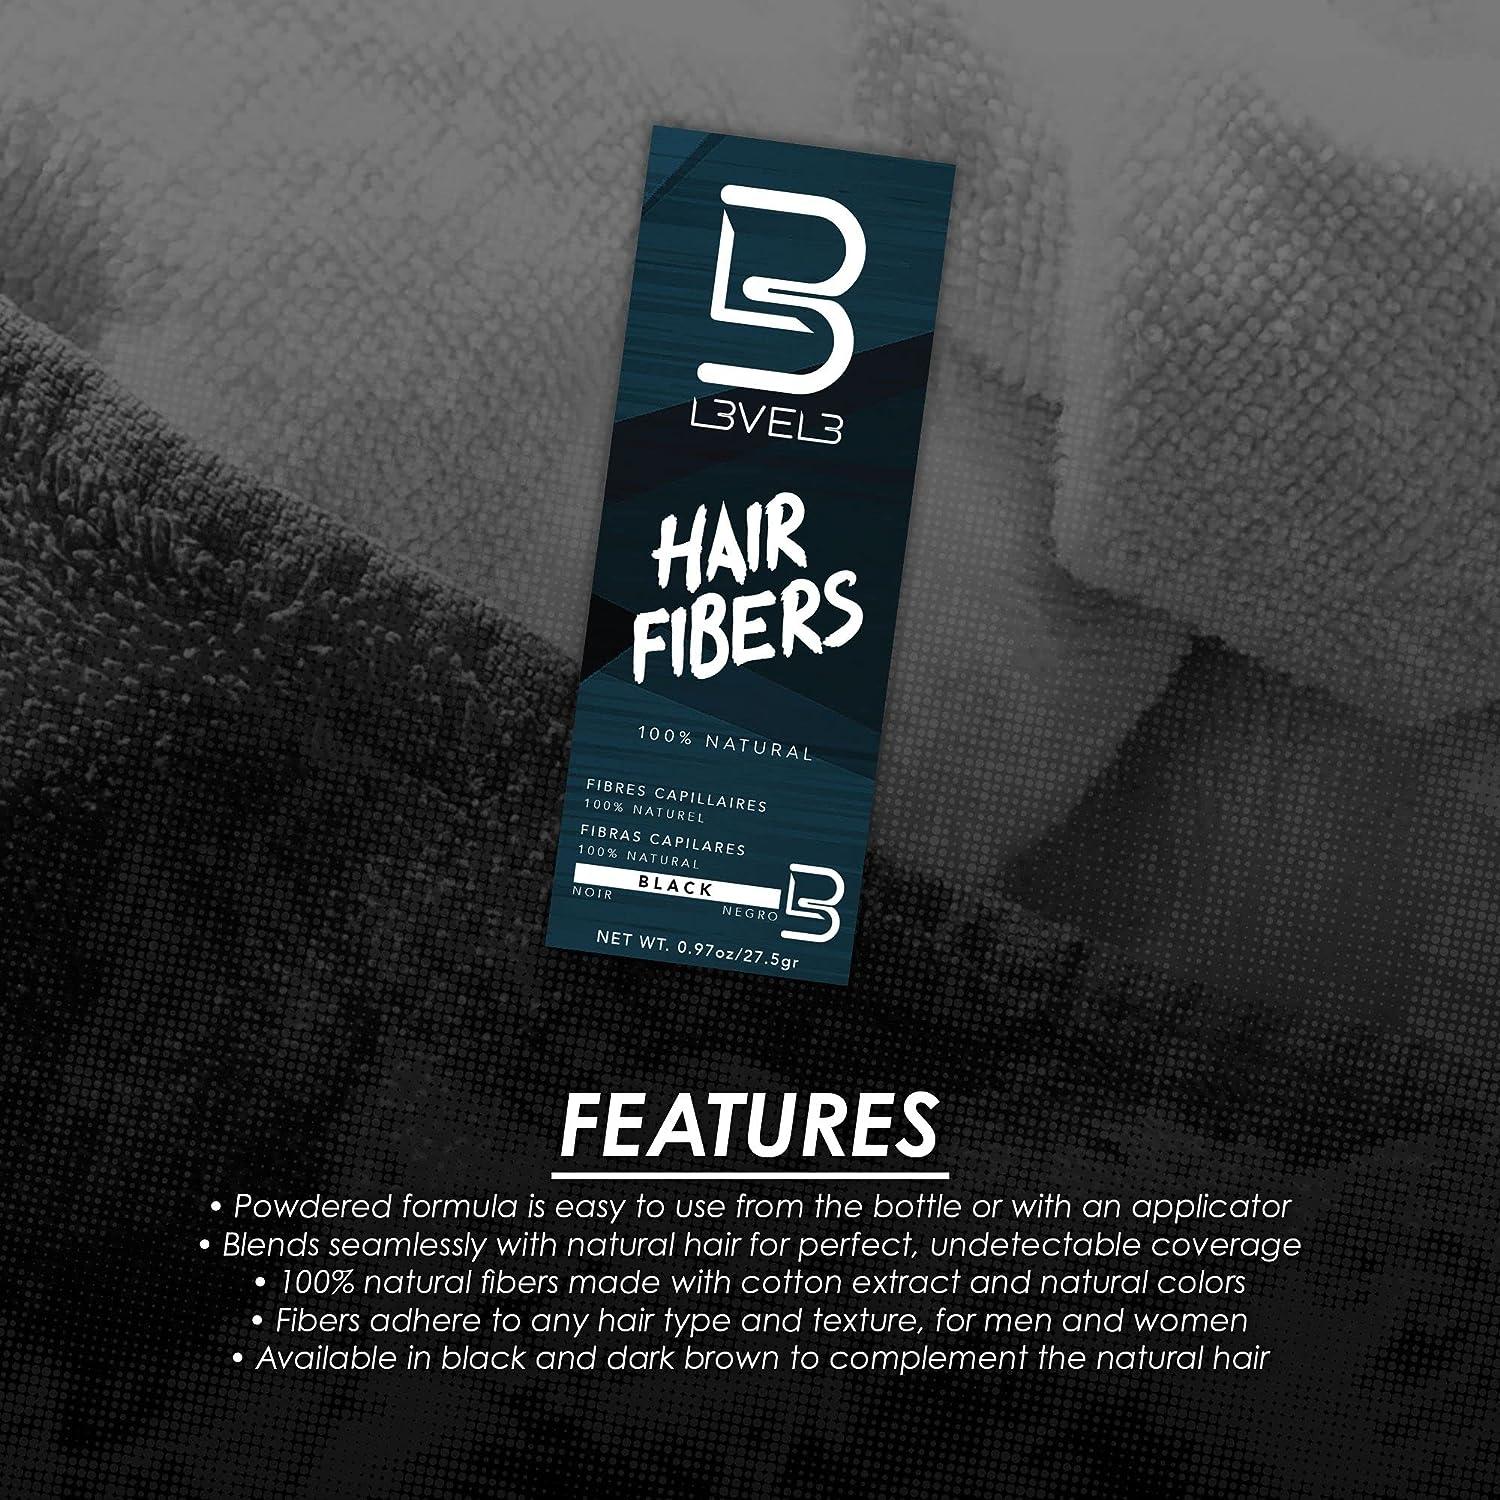 Level 3 Hair Fibers - Cover Bald Spot or Thinning Hair - Natural Looking  Finish - Instant Grey Coverage and Thicker Hair (Black)